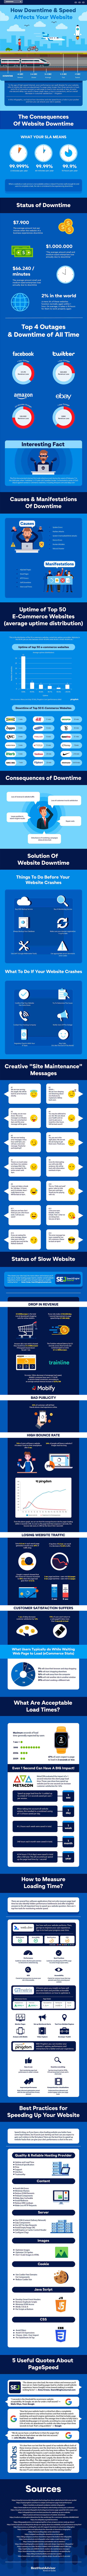 How Downtime & Speed Affects Your Website 